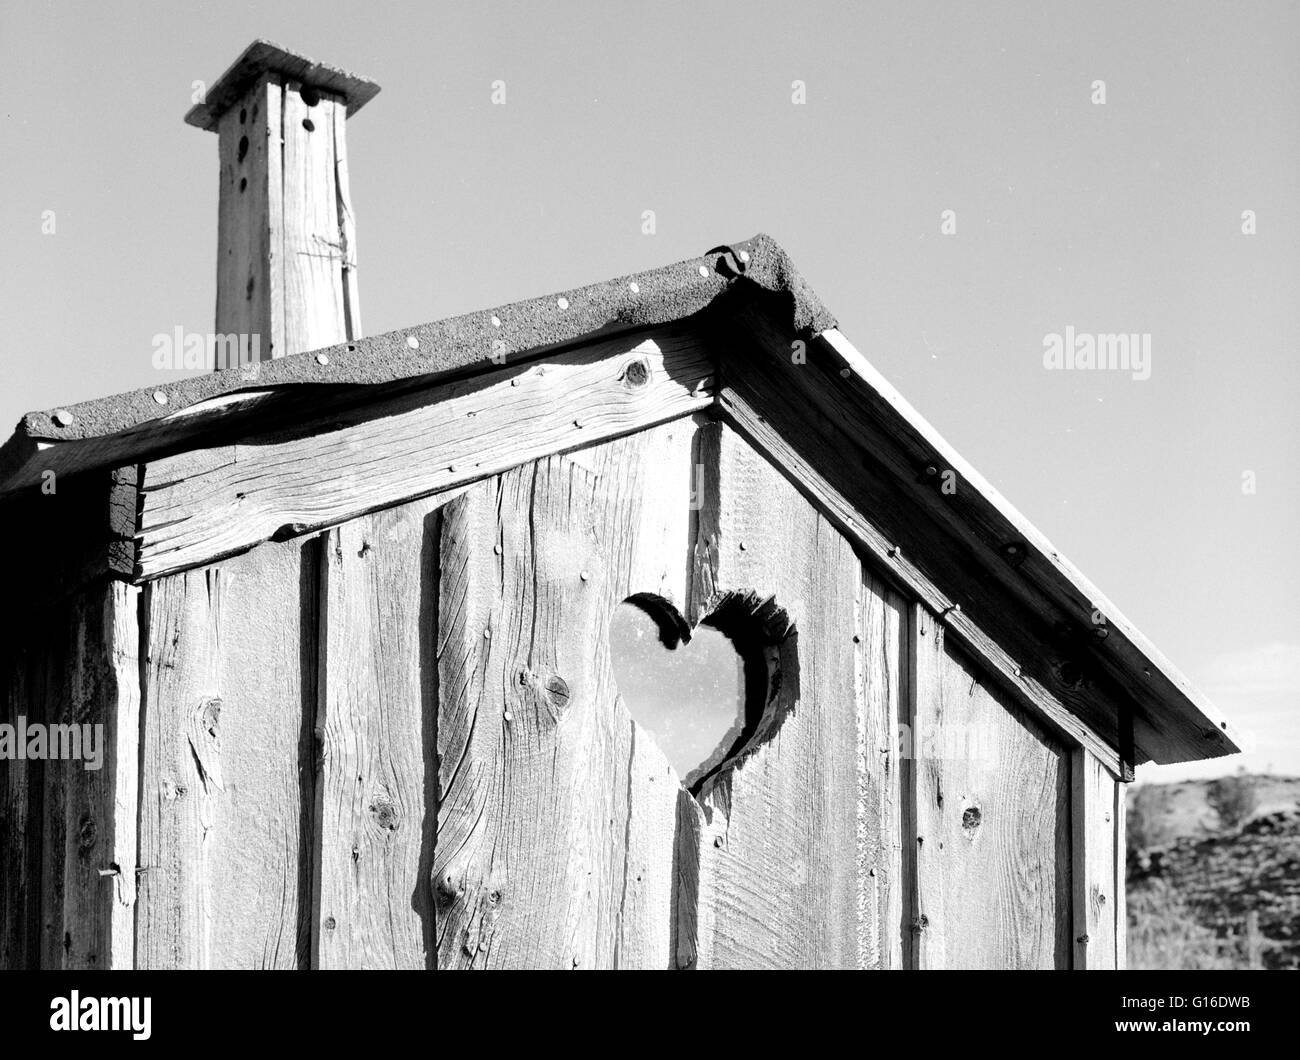 Detail of privy showing heart-shaped ventilator, South Pass Avenue, South Pass City, Fremont County, Wyoming. Valentine's Day, also known as Saint Valentine's Day or the Feast of Saint Valentine, is a holiday observed on February 14 each year. It is celeb Stock Photo